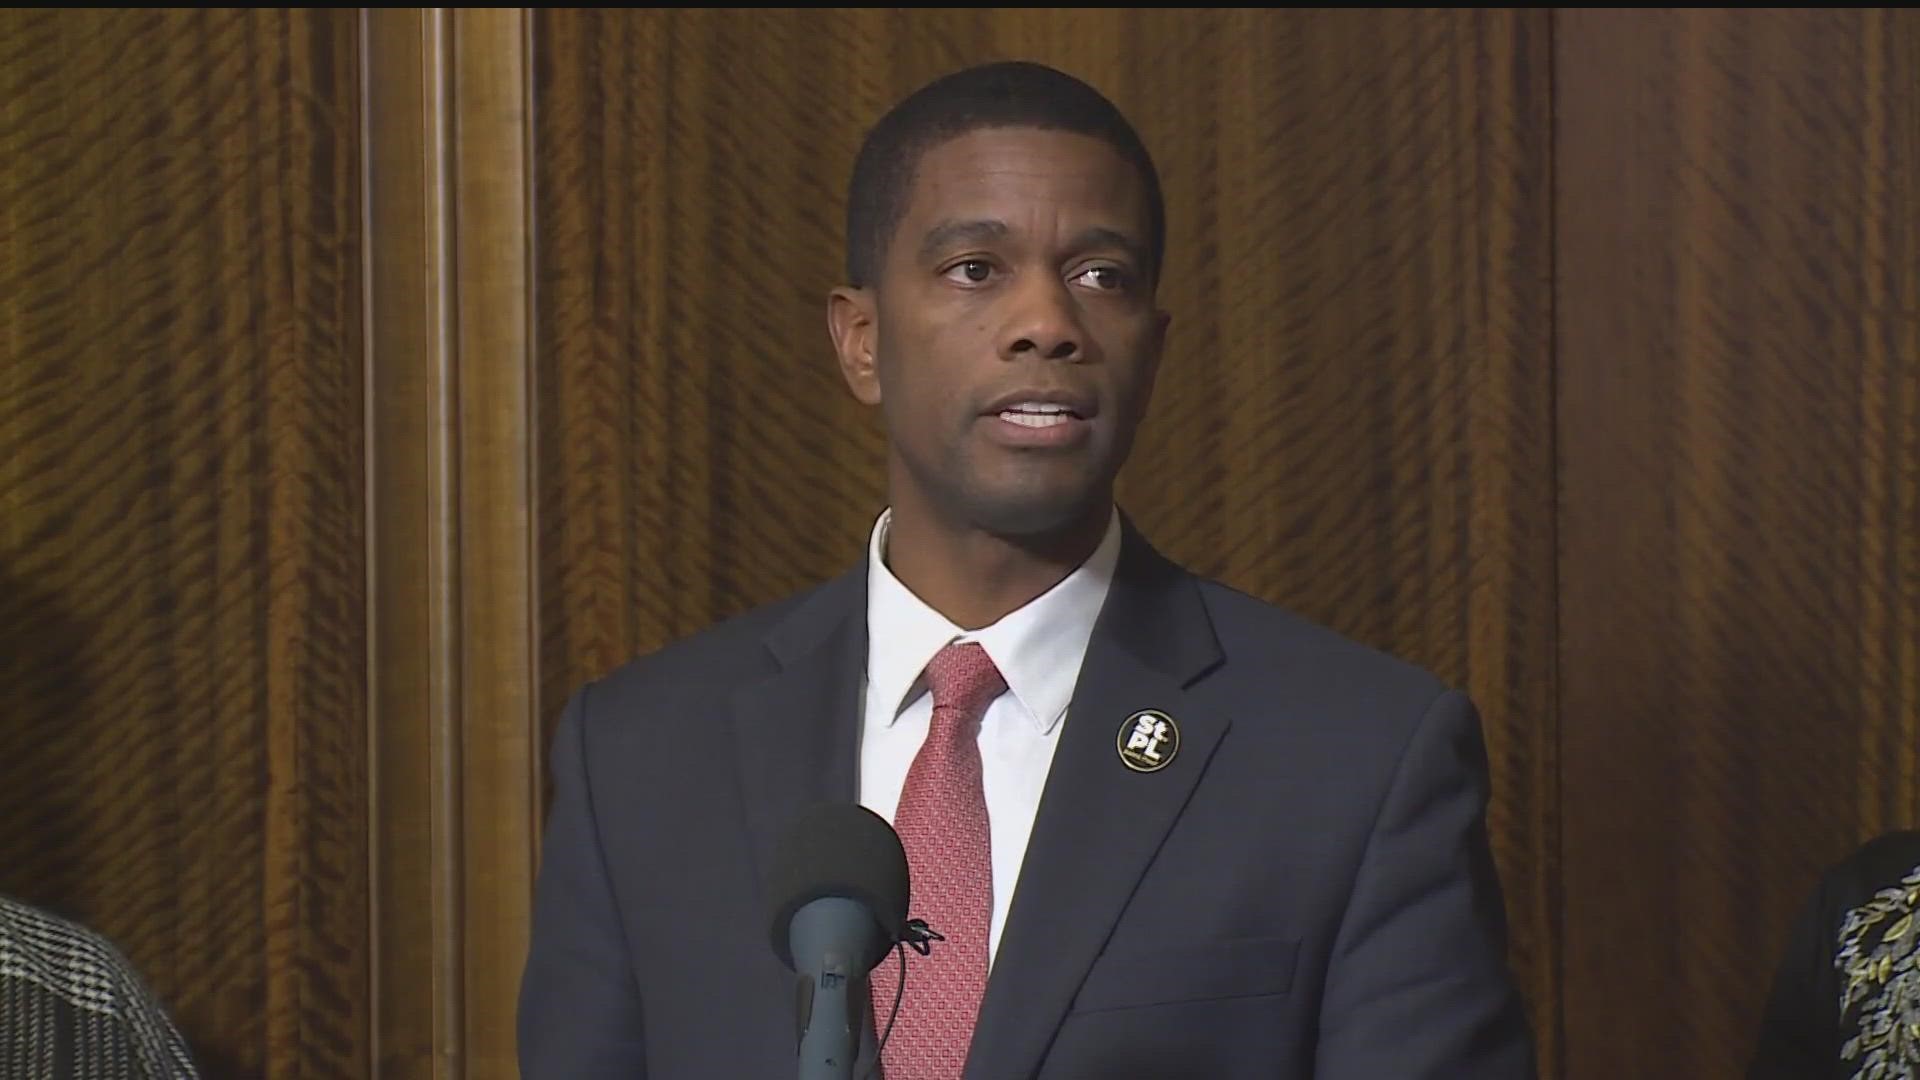 In response to the shooting, Carter says he's working to ban firearms in St. Paul libraries and recreation centers, among other initiatives to curb youth violence.